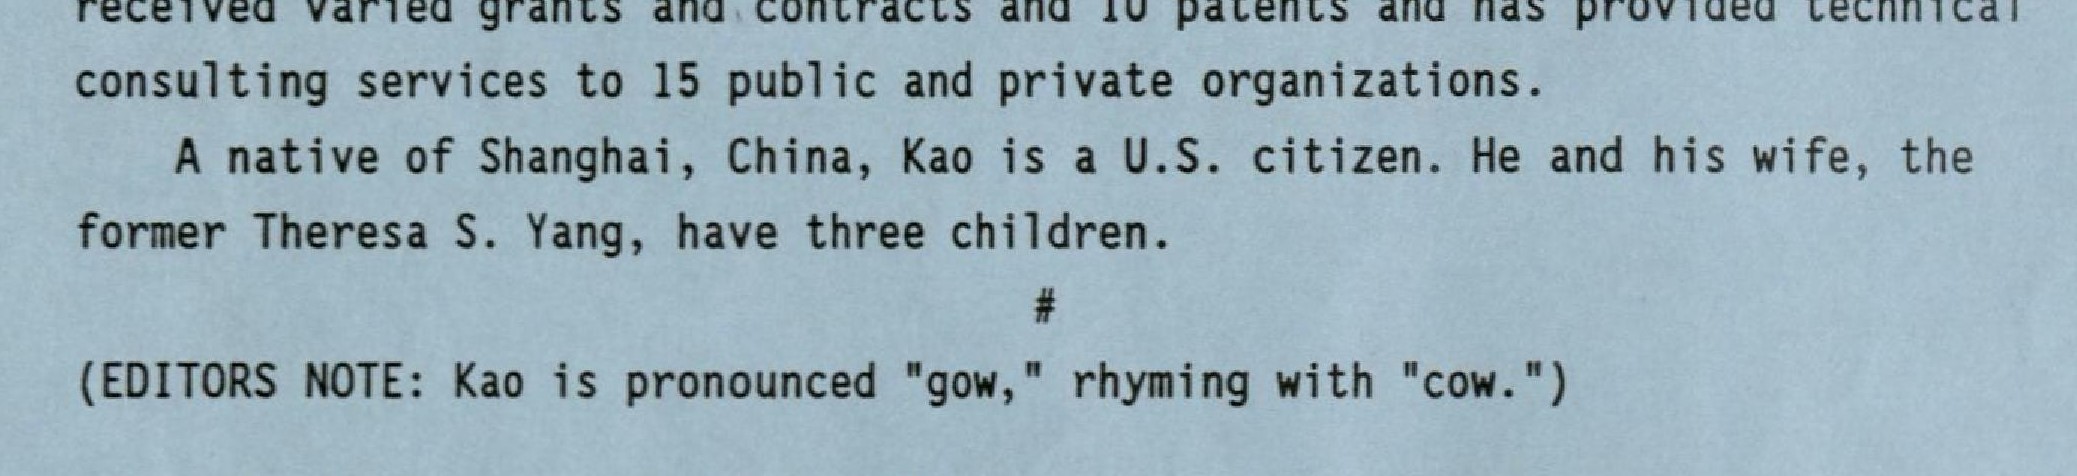 Excerpt from memo entitled "Regents Approve Kao As new ISU Engineering Dean." RS 11/1/16, Box 1, Folder 1. Text reads as follows: "recieved varied grants and contracts and 10 patents and has provided technical consulting services to 15 public and private organizations. A Native of Shanghai, China, kao is a U.S. citizen. He and his wife, the former Theresea S. Yang, have three children. (Editors Note: Kao is pronounced 'gow,' rhyming with 'cow.')."